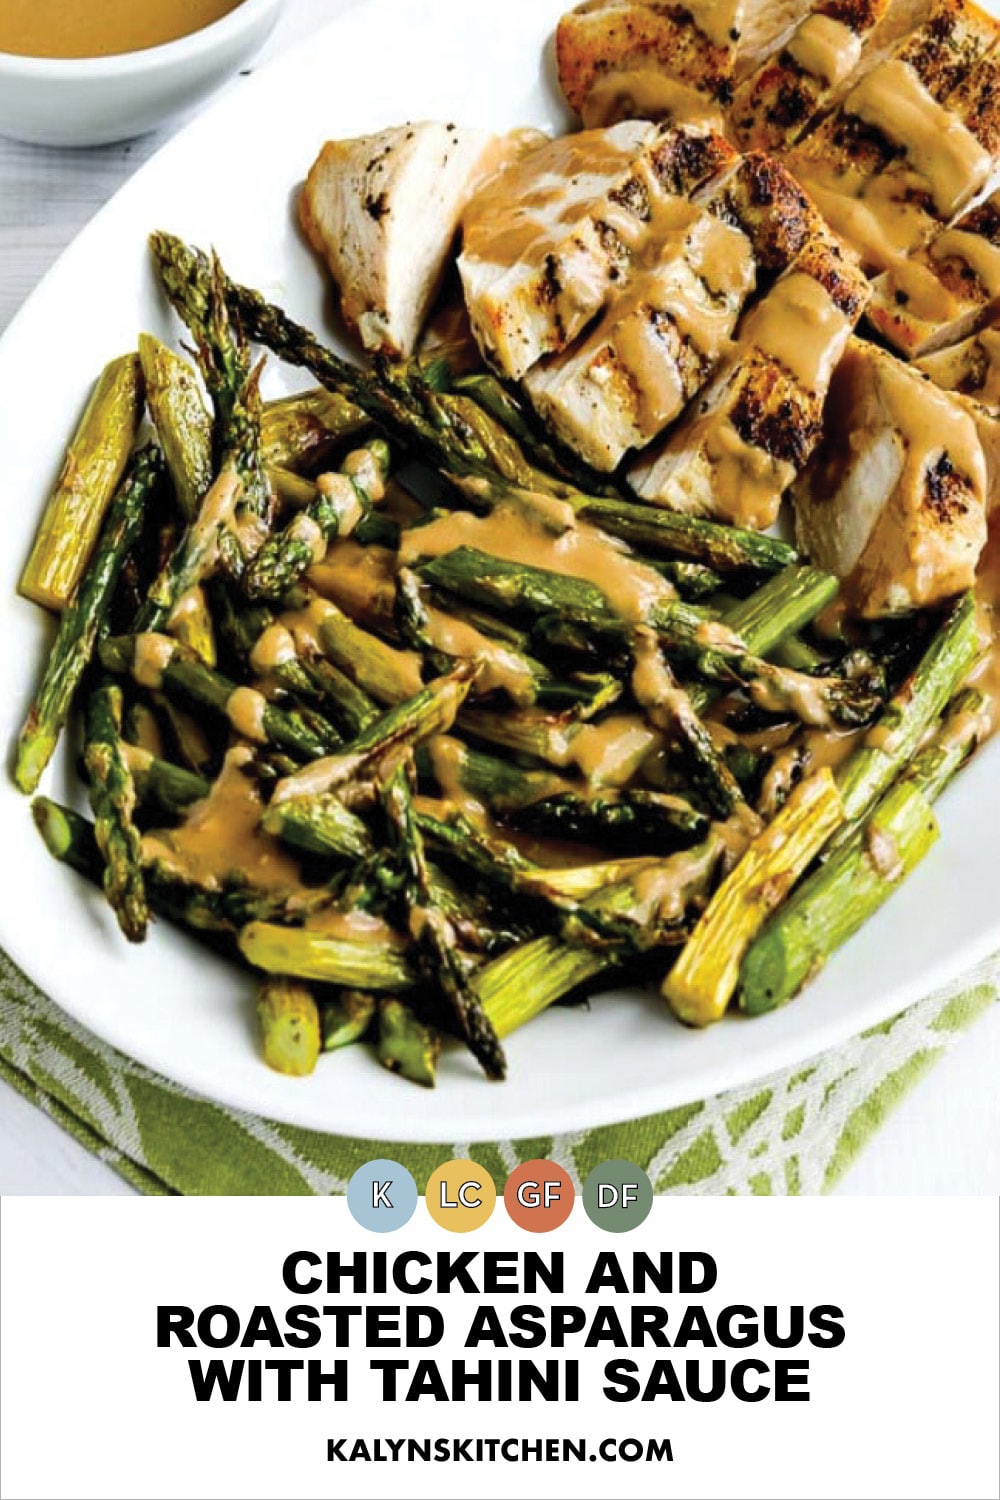 Pinterest image of Chicken and Roasted Asparagus with Tahini Sauce